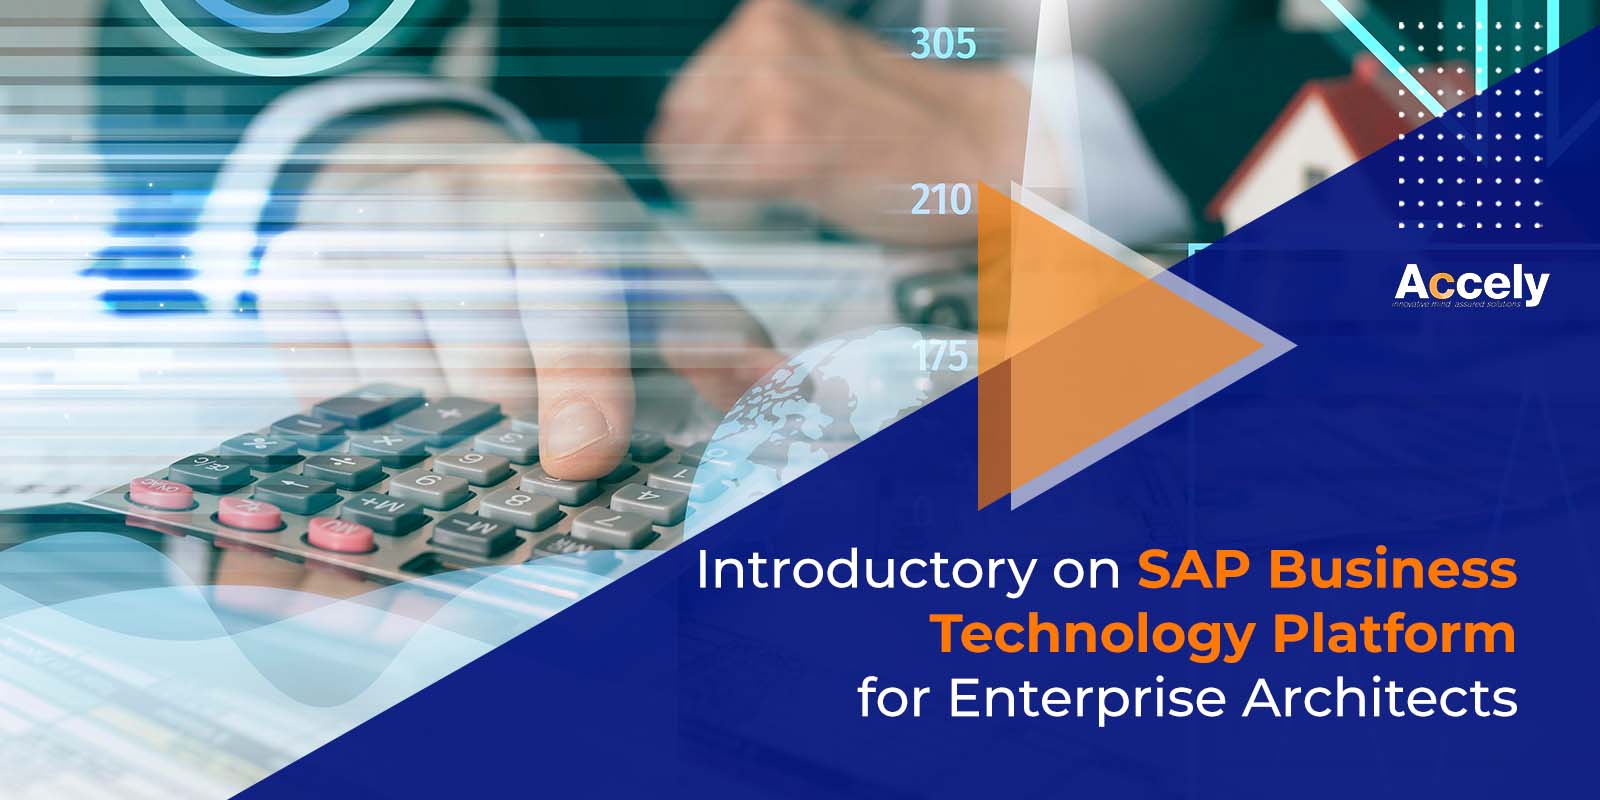 Introductory on SAP Business Technology Platform for Enterprise Architects